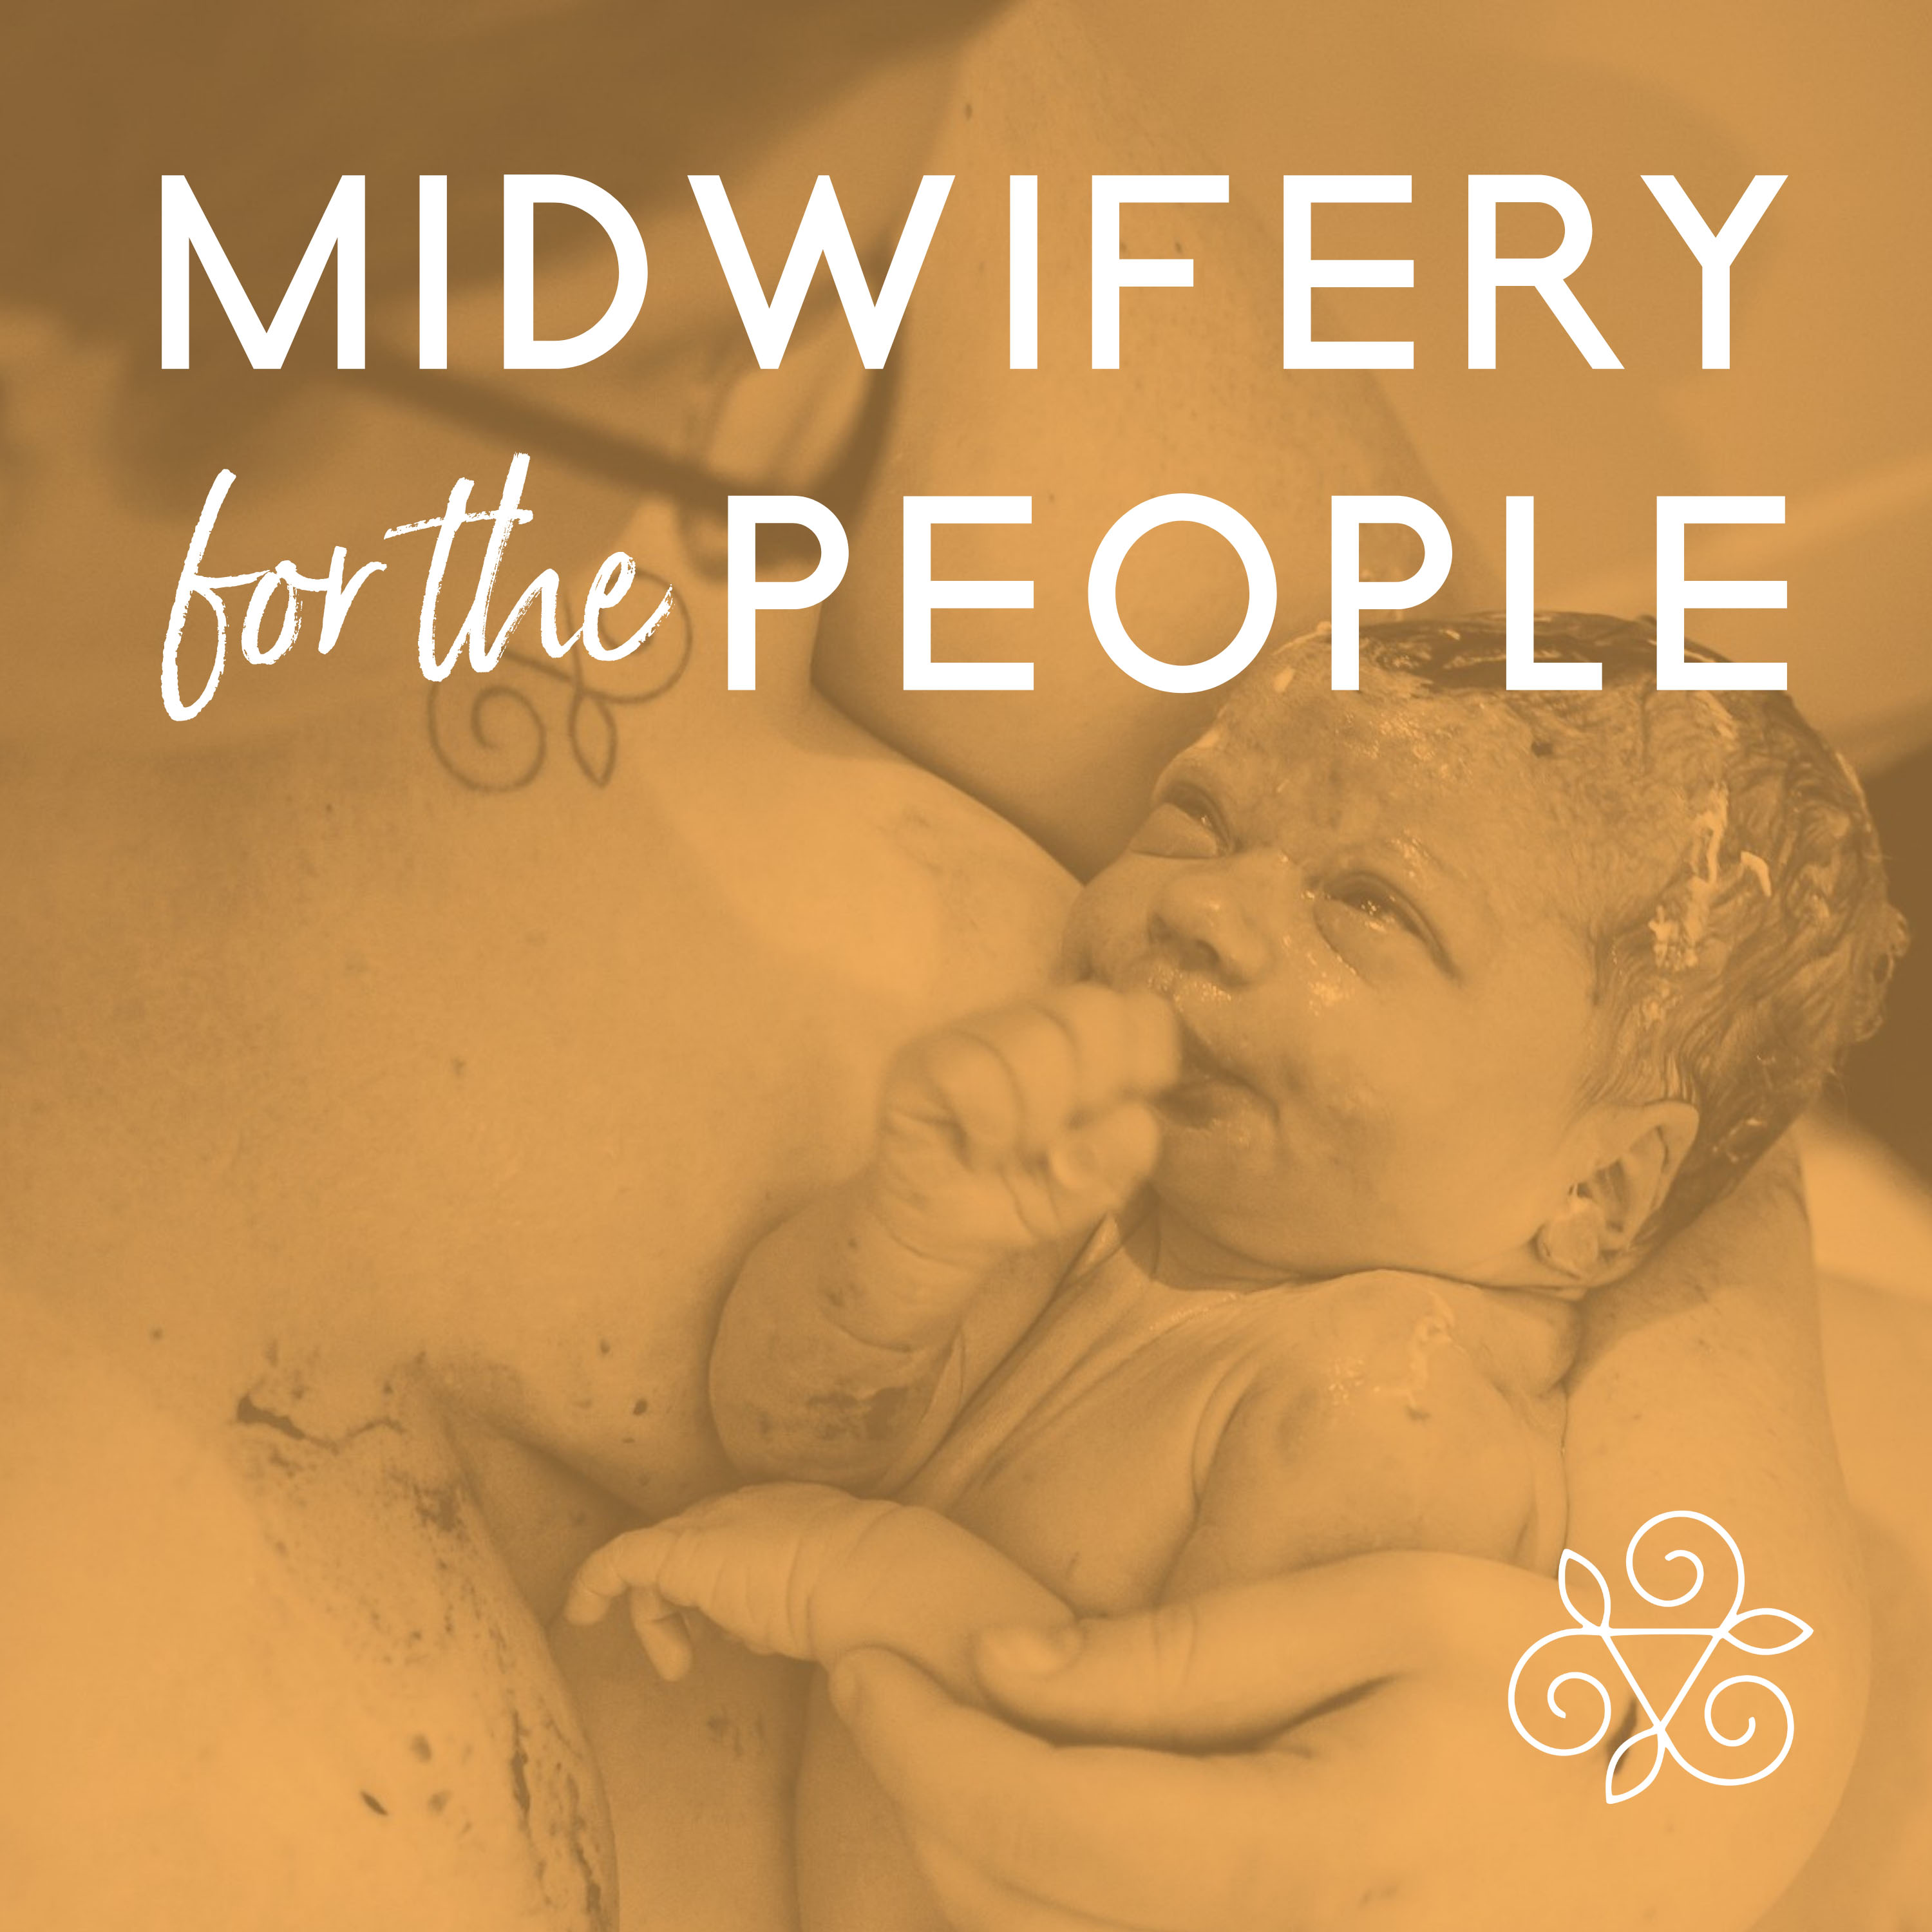 Midwifery for the People